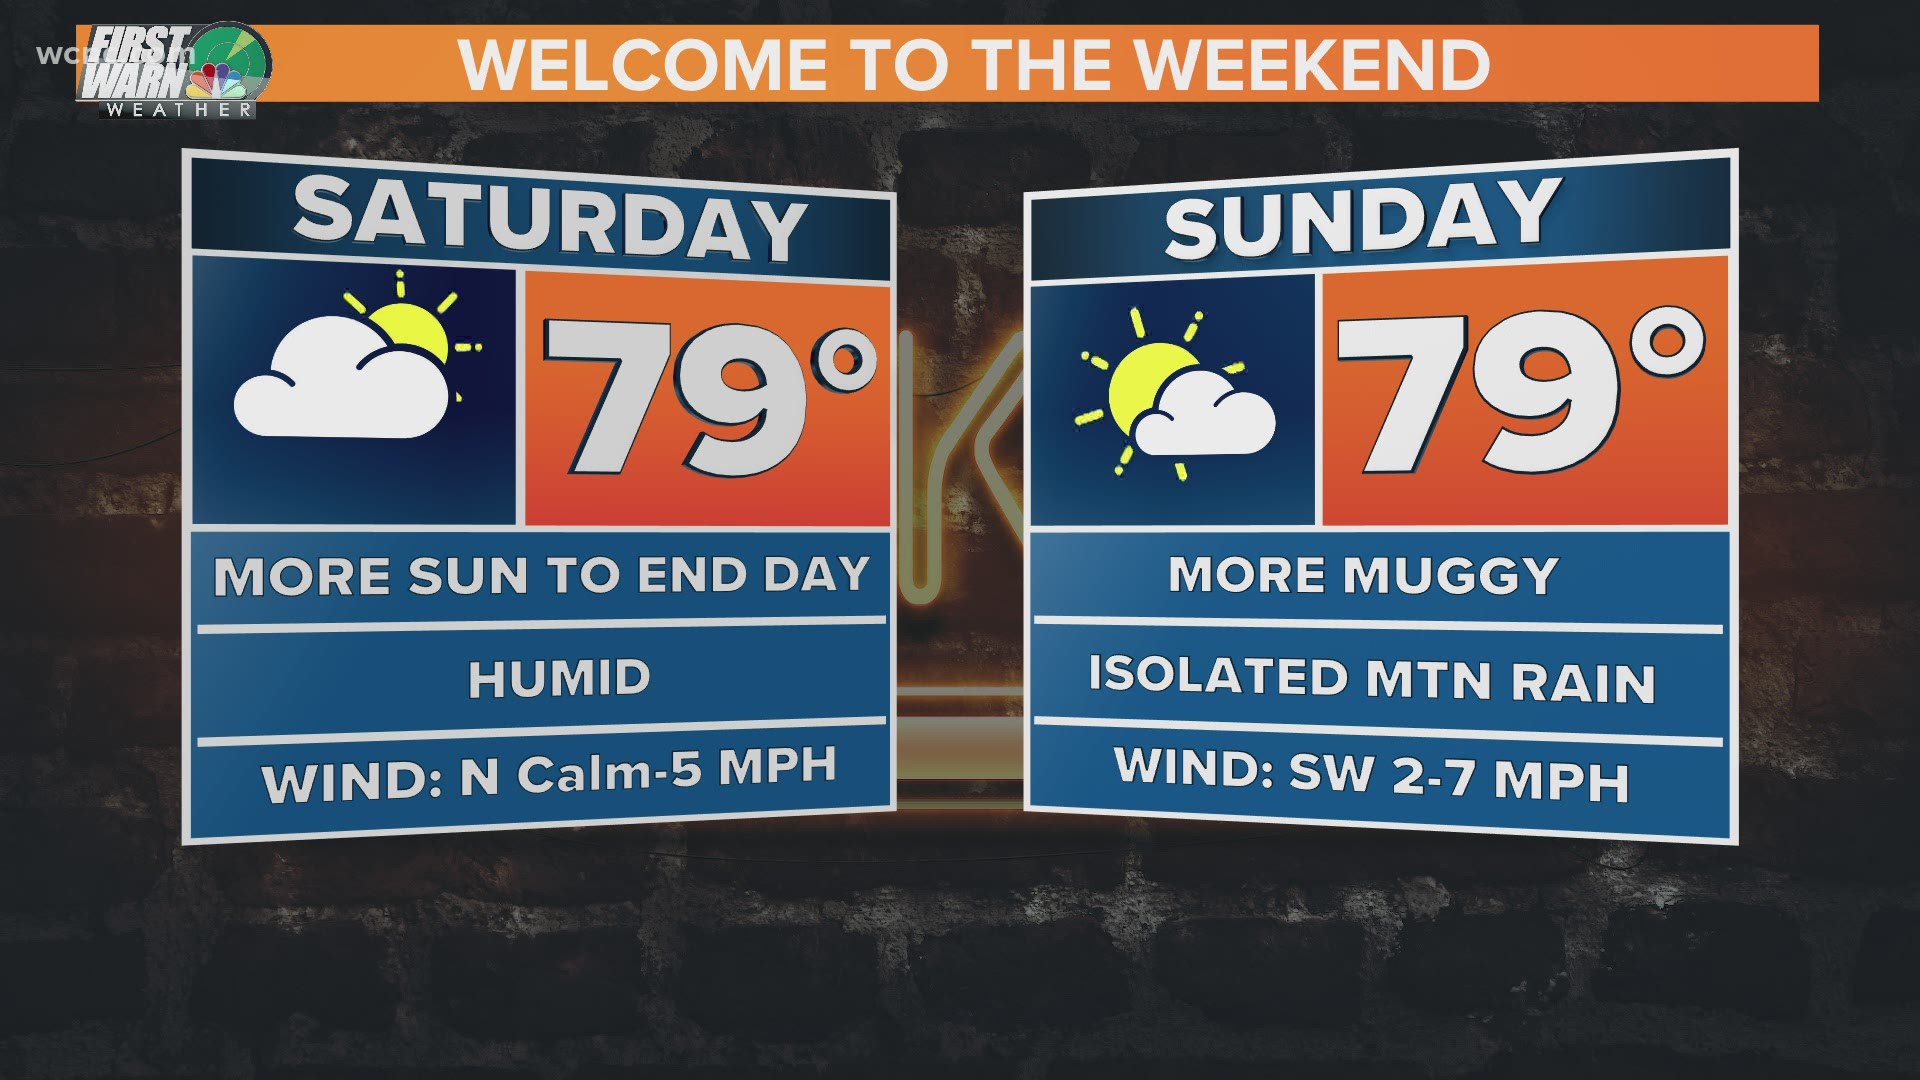 Not a bad weekend. A little sunshine will peek through the clouds today and tomorrow. Slight chance for rain in the Mountains today and tomorrow